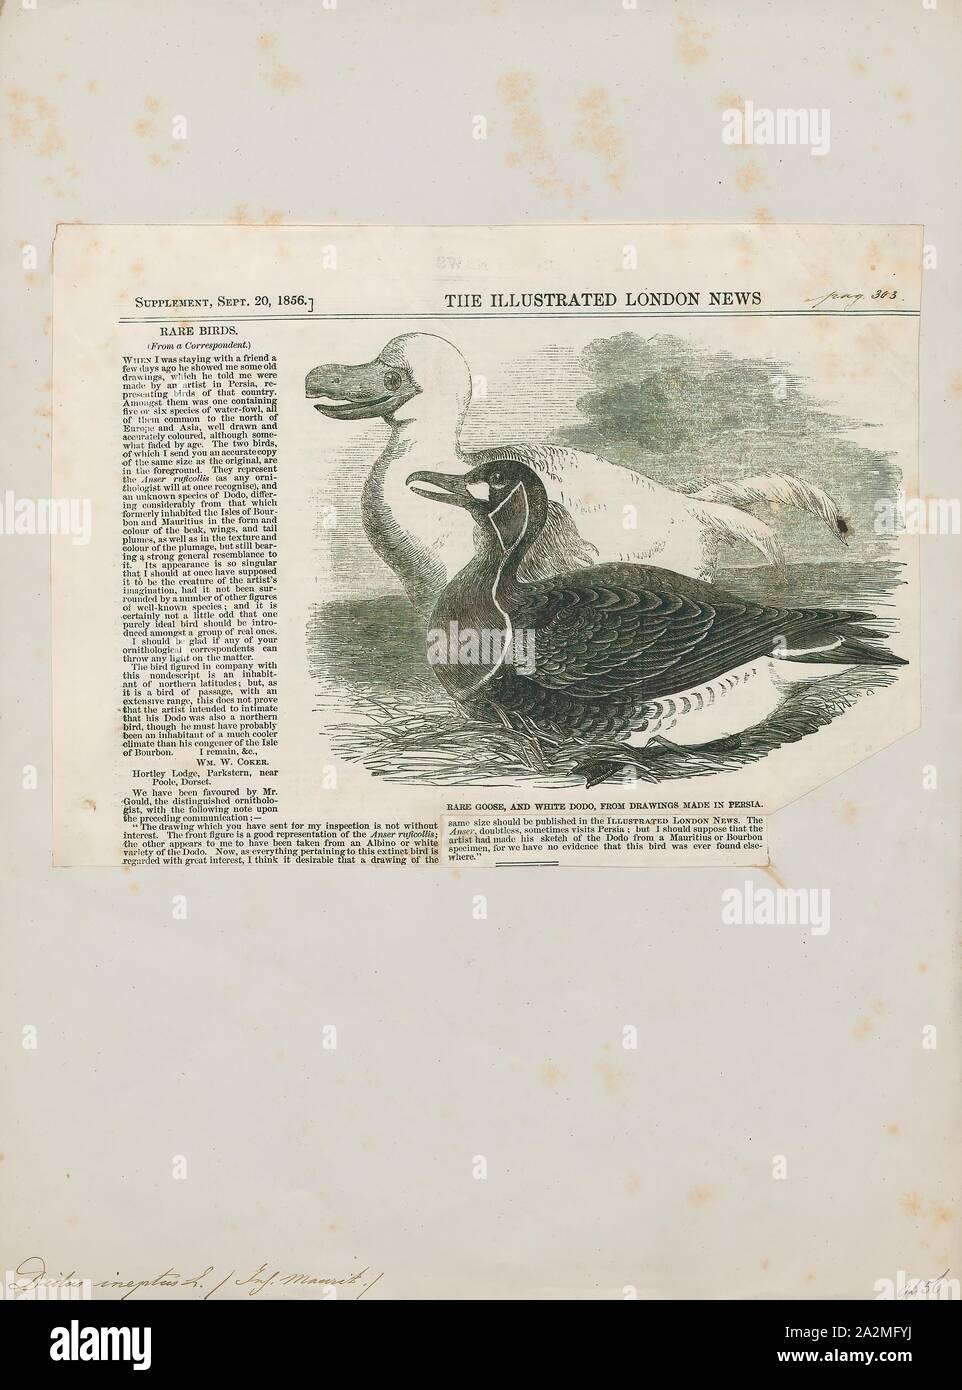 Didus ineptus, Print, The dodo (Raphus cucullatus) is an extinct flightless bird that was endemic to the island of Mauritius, east of Madagascar in the Indian Ocean. The dodo's closest genetic relative was the also-extinct Rodrigues solitaire, the two forming the subfamily Raphinae of the family of pigeons and doves. The closest living relative of the dodo is the Nicobar pigeon. A white dodo was once thought to have existed on the nearby island of Réunion, but this is now thought to have been confusion based on the Réunion ibis and paintings of white dodos., 1856 Stock Photo